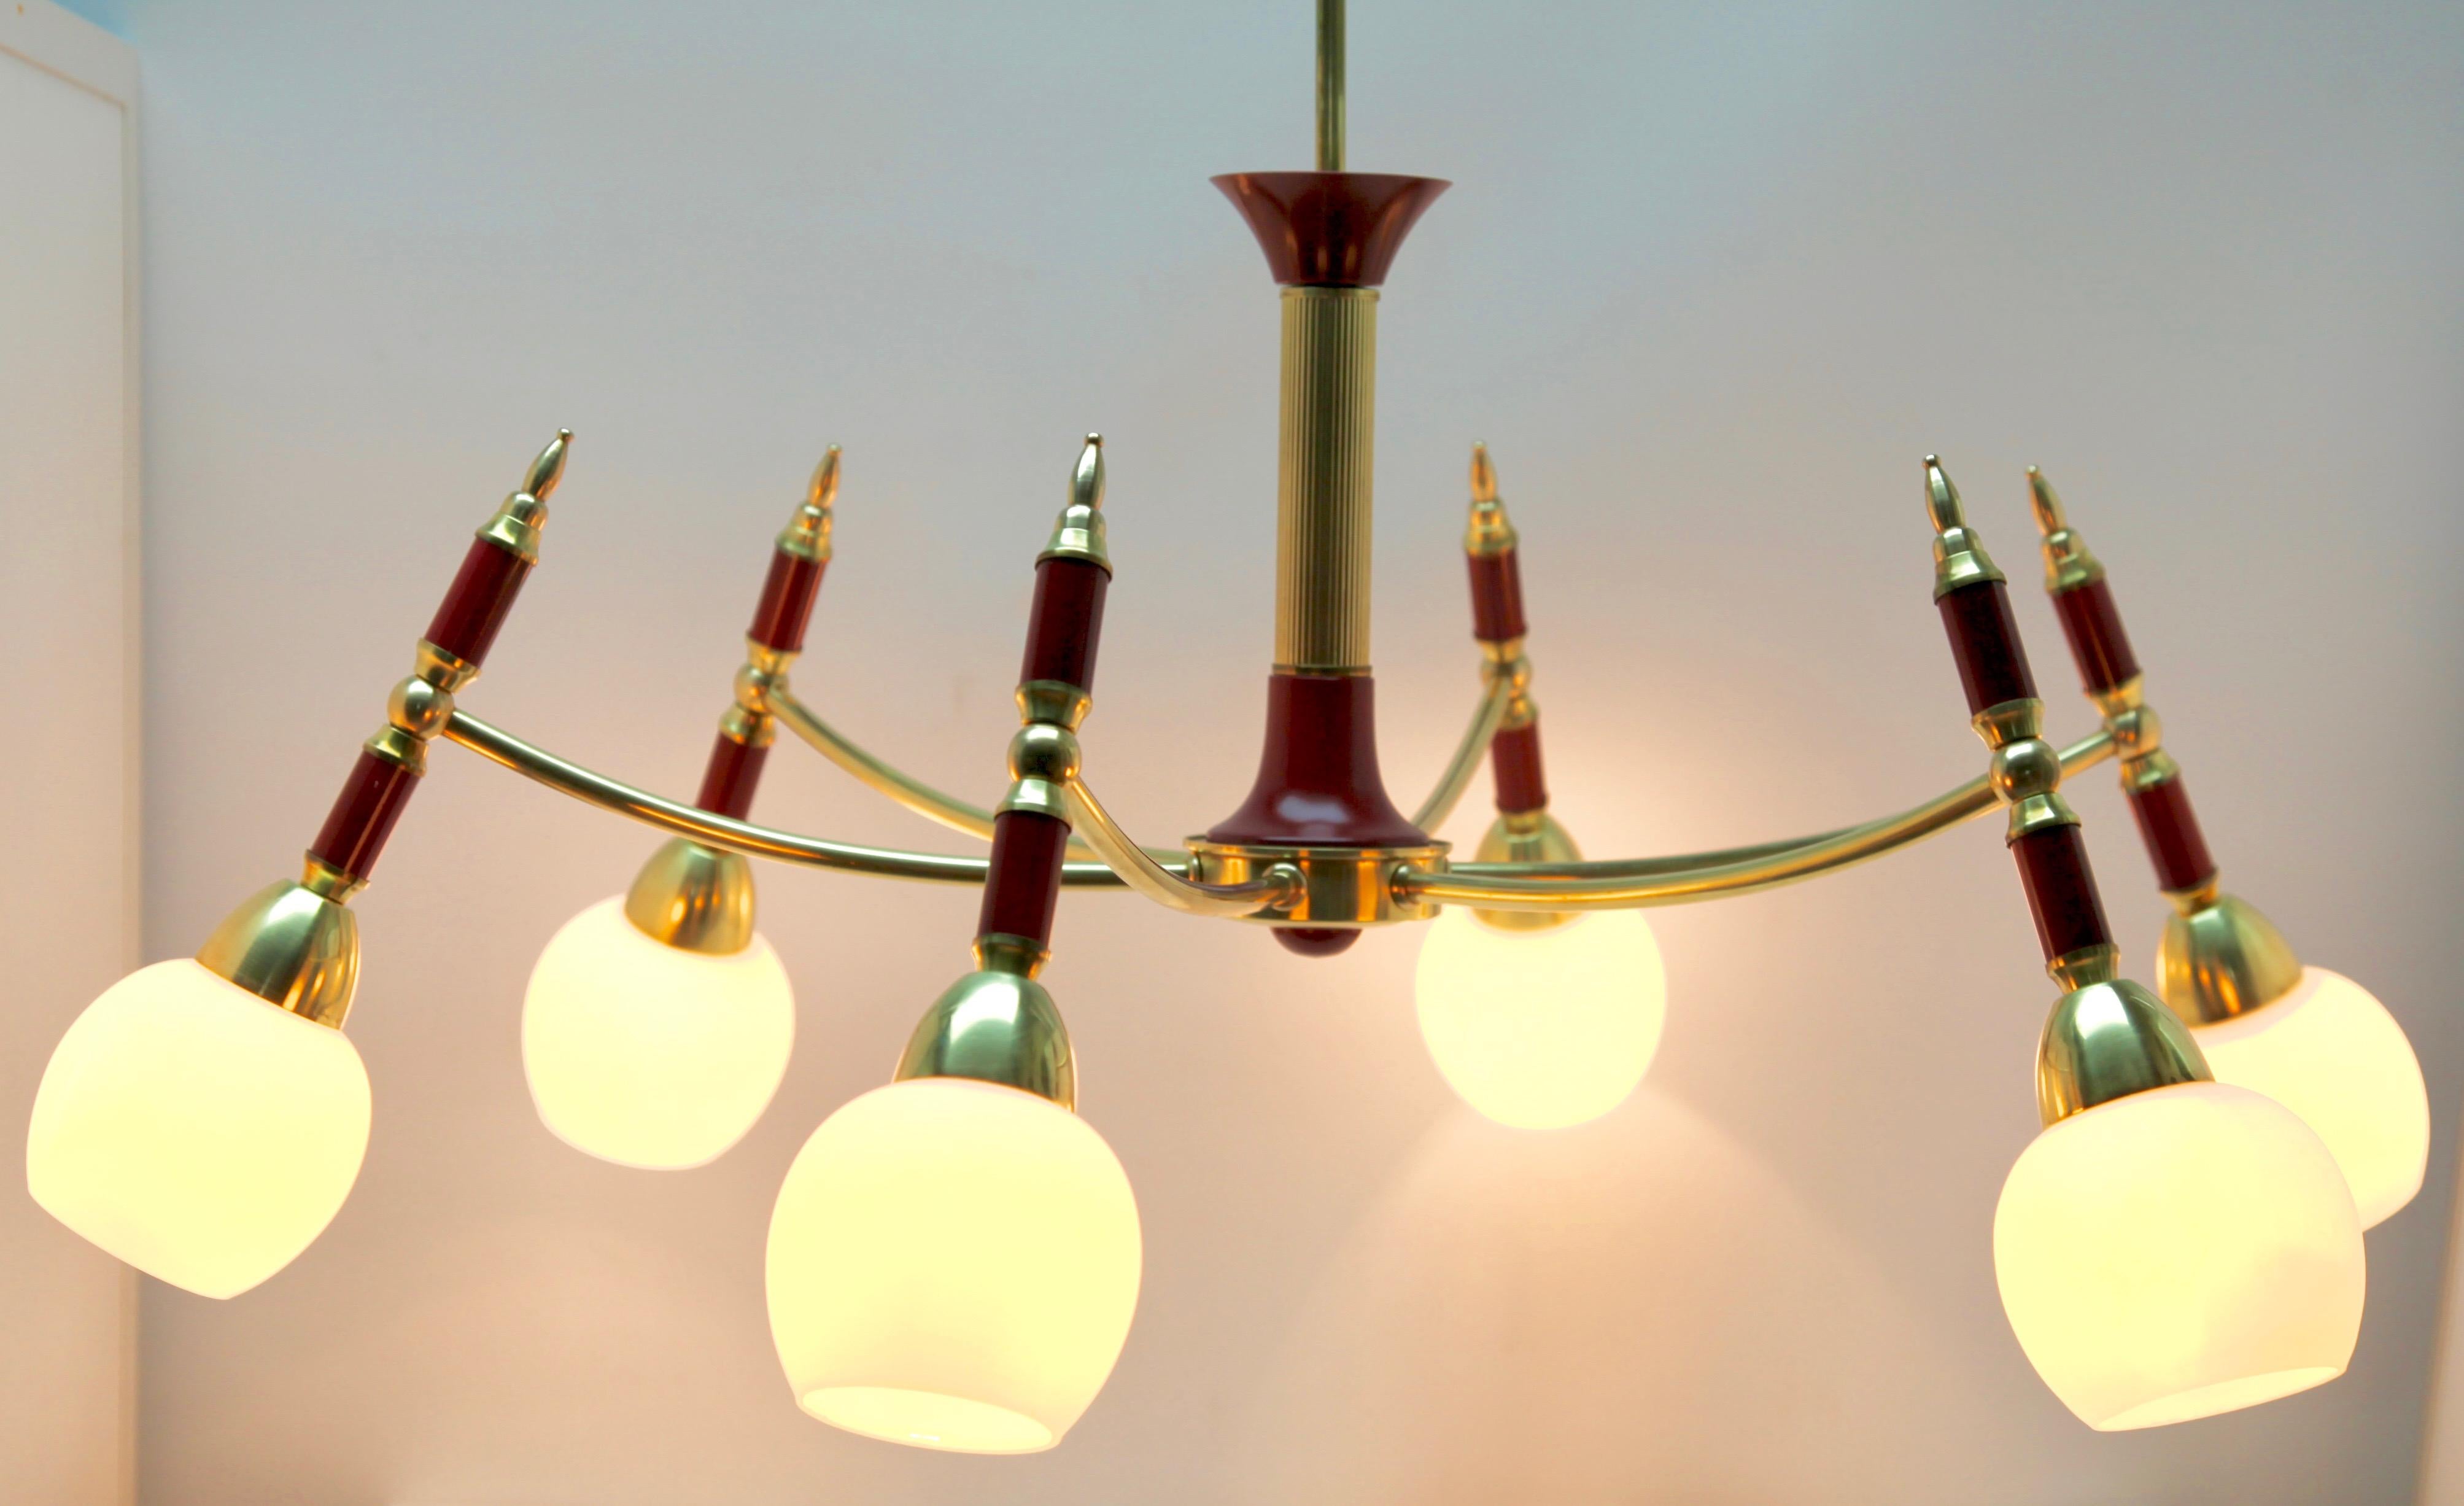 Eight arms chandelier style of Stilnovo.
Photography fails to capture the simple elegant illumination provided by this lamp.

Recently cleaned and polished so that it in excellent condition and in full working order having also
been re-wired